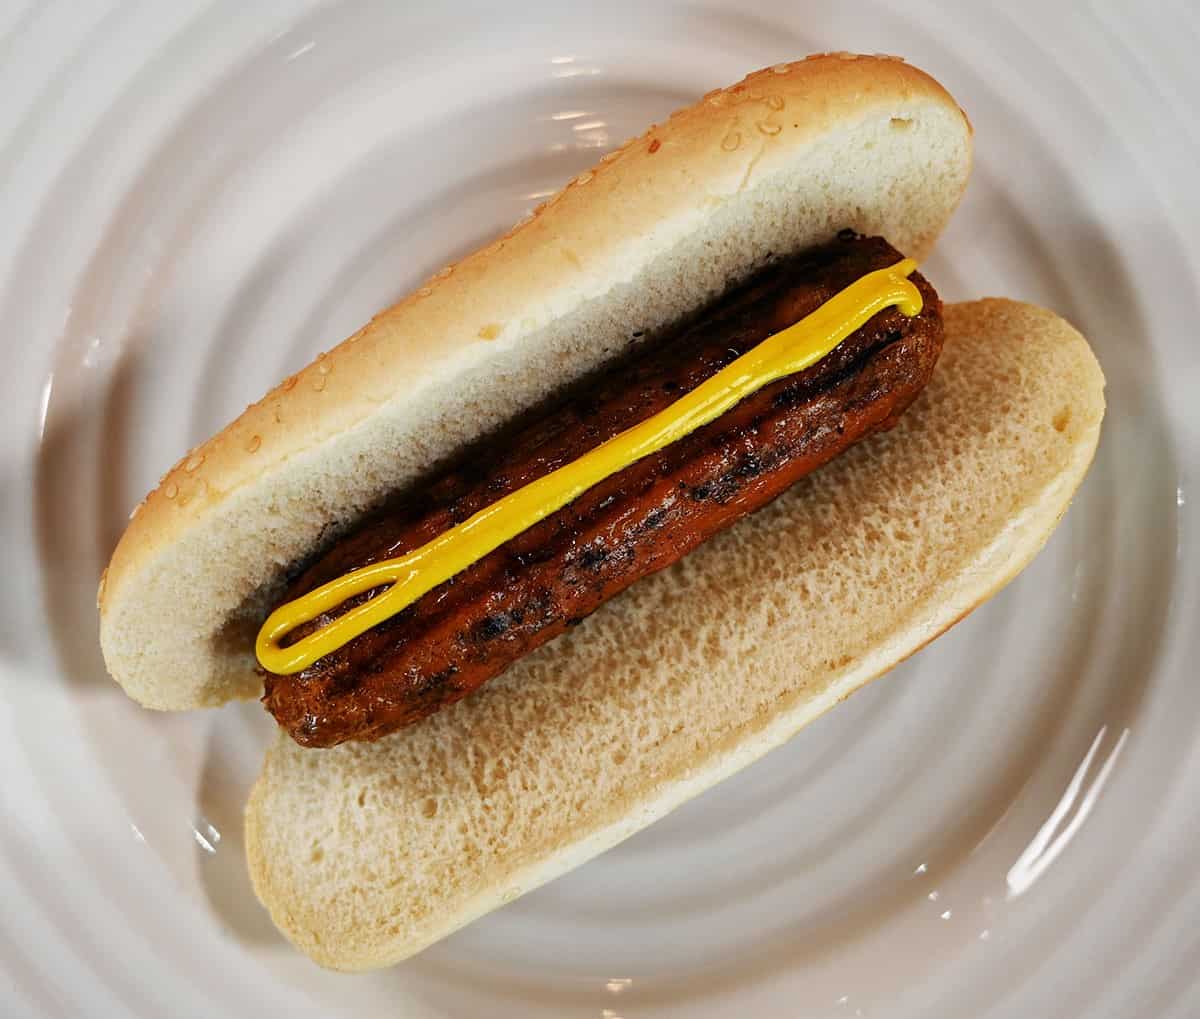 Costco Beyond Meat Beyond Sausage served like a hot dog with mustard on it, on a white plate. 